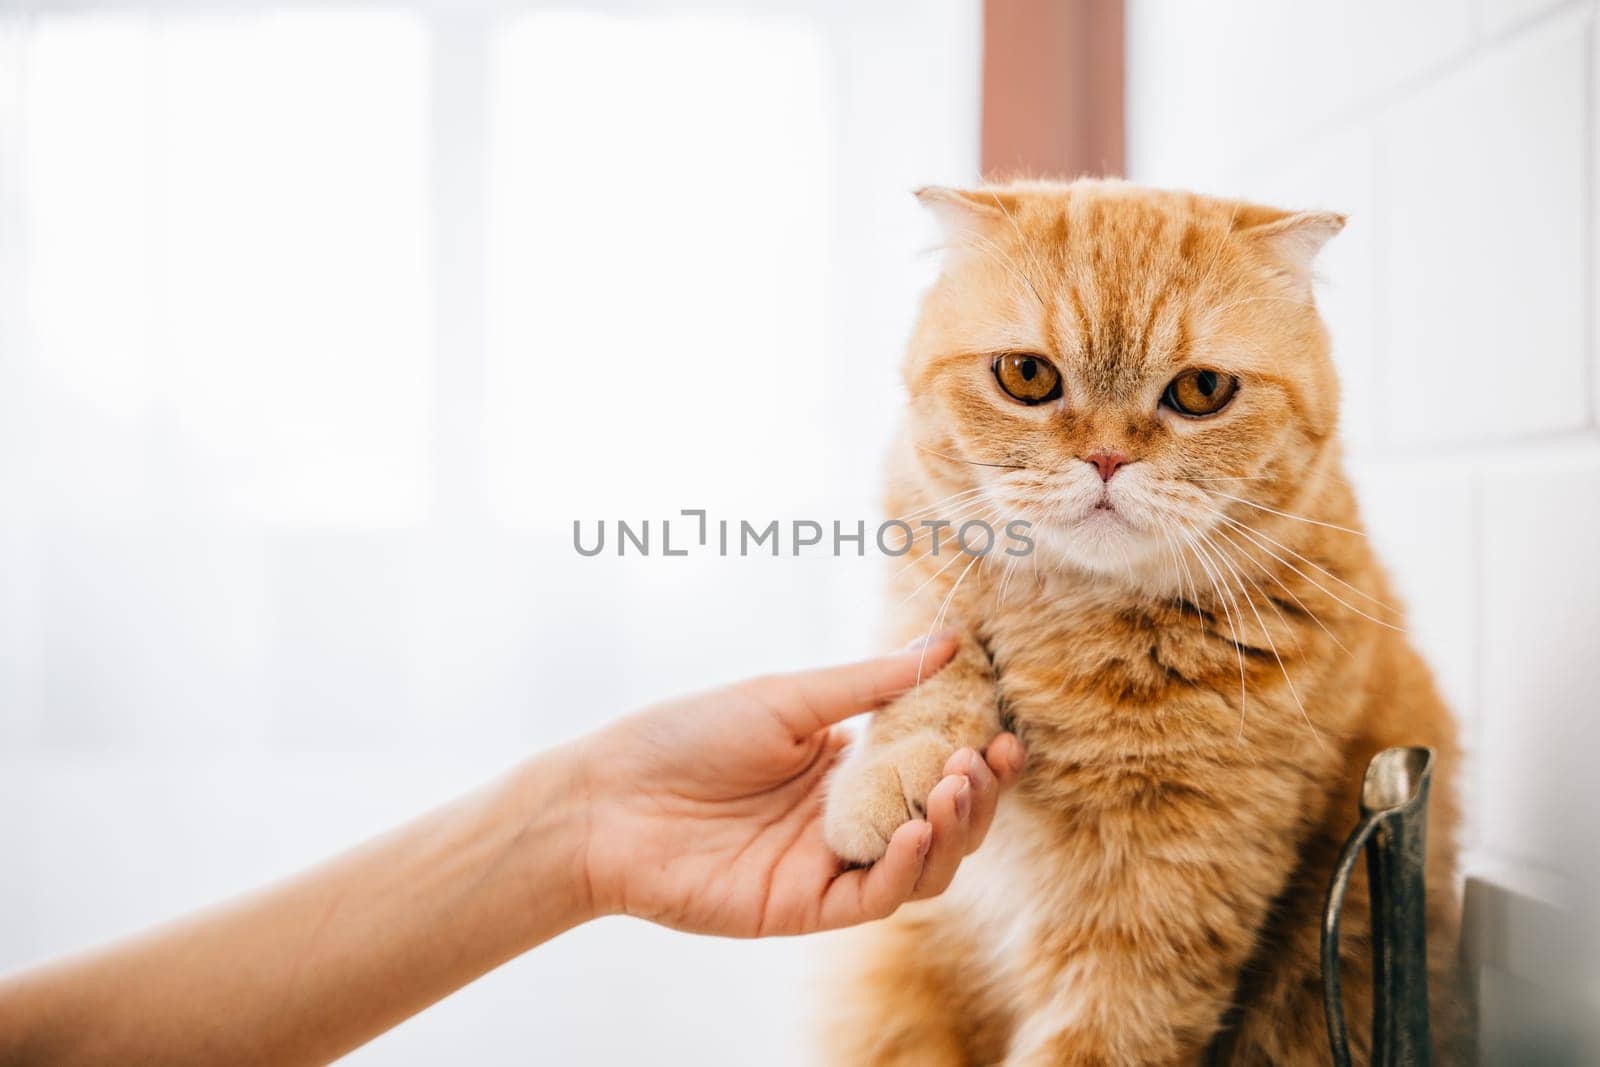 A pet owner enjoys a moment of togetherness with her cat, holding its paw as they sit in perfect harmony, a heartwarming display of friendship and support. Pat love